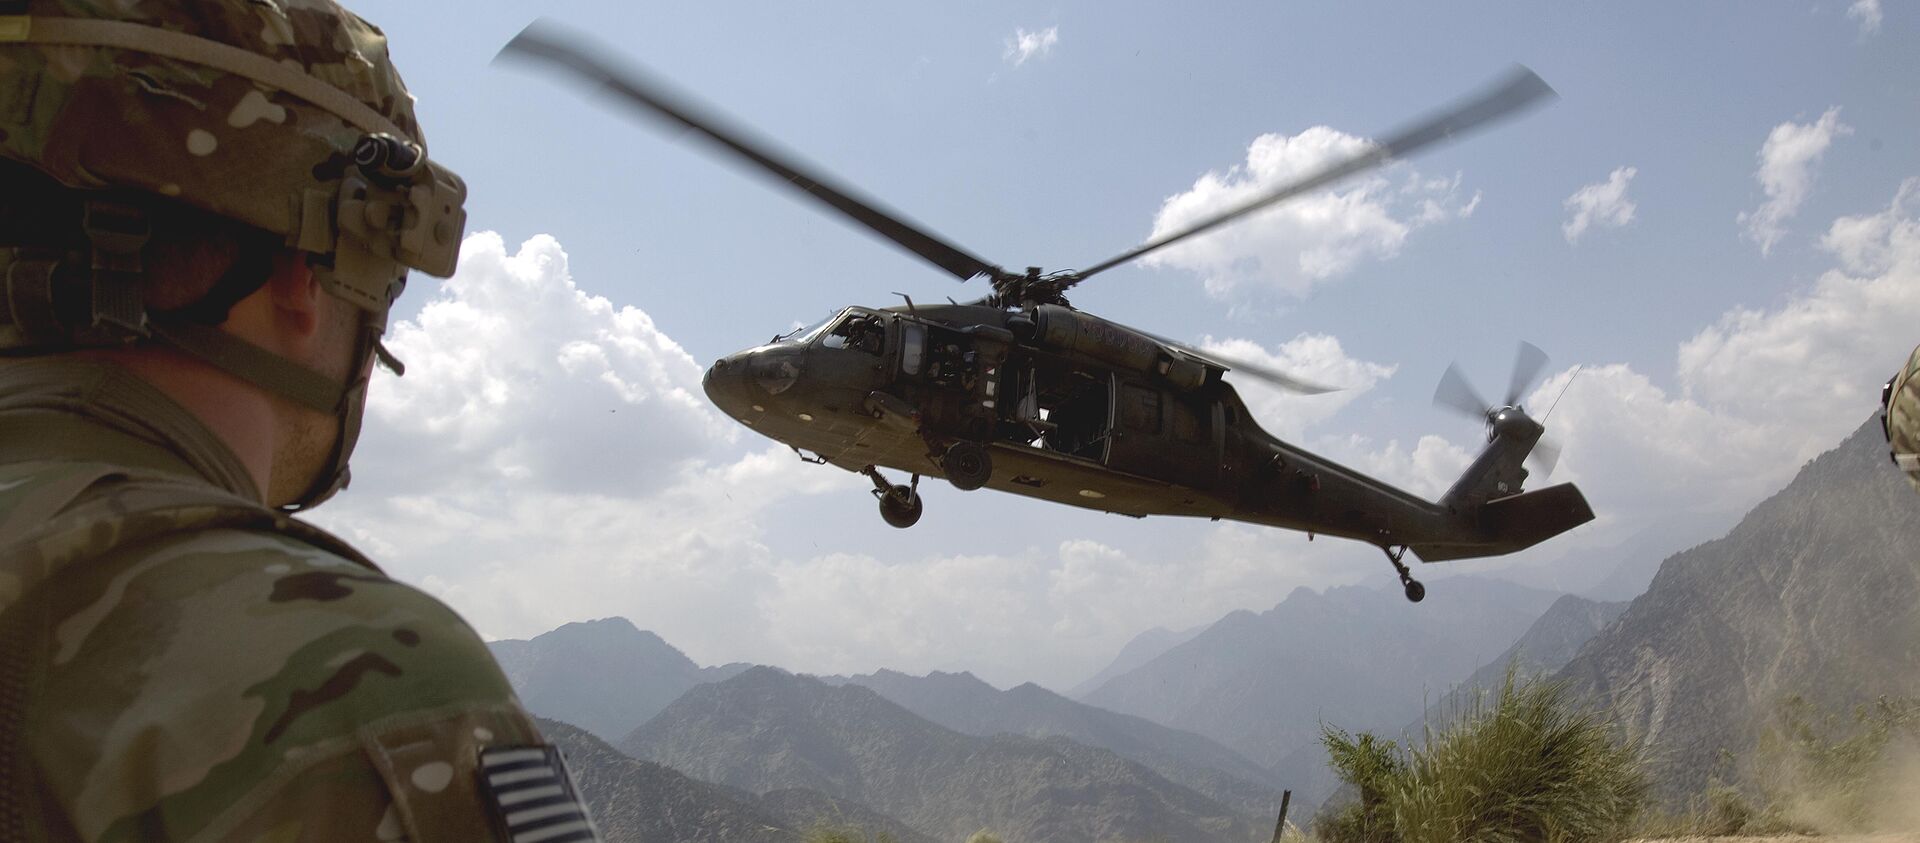 Soldiers with the U.S. Army's 2nd Battalion 27th Infantry Regiment based in Hawaii, pull security as a Blackhawk helicopter lands during an assessment mission to Observation Point Mace days after insurgents attacked four outposts in the area killing some two dozen members of Afghan security forces Saturday, July 9, 2011 in Kunar province, Afghanistan - Sputnik International, 1920, 16.02.2018